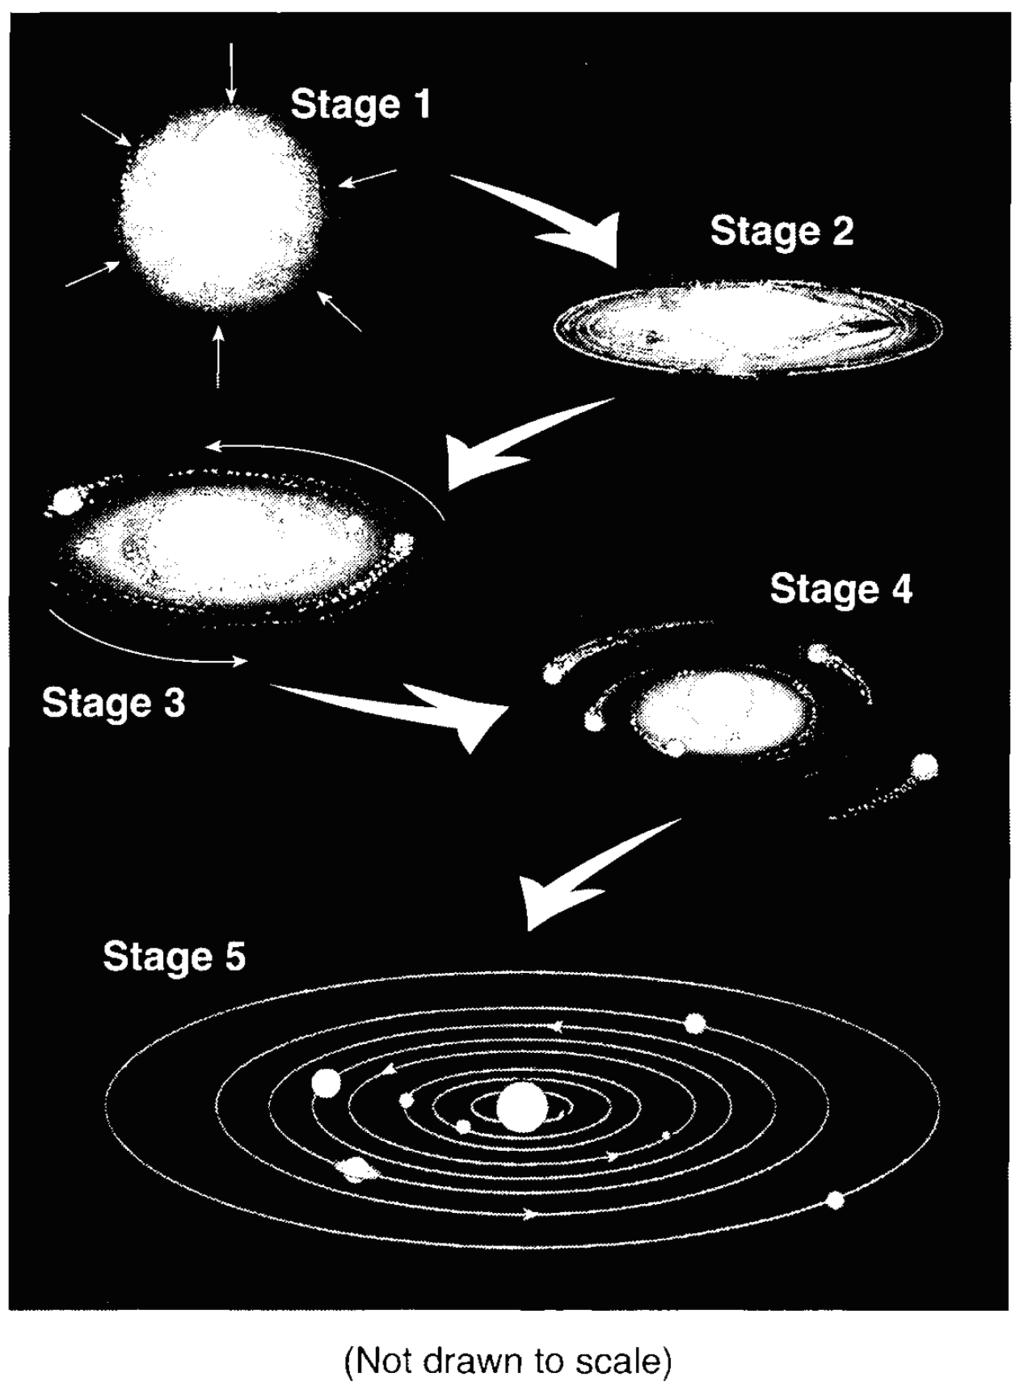 54. Base your answer to the following question on the diagram below. The diagram represents the inferred stages in the formation of our solar system. Stage 1 shows a contracting gas cloud.